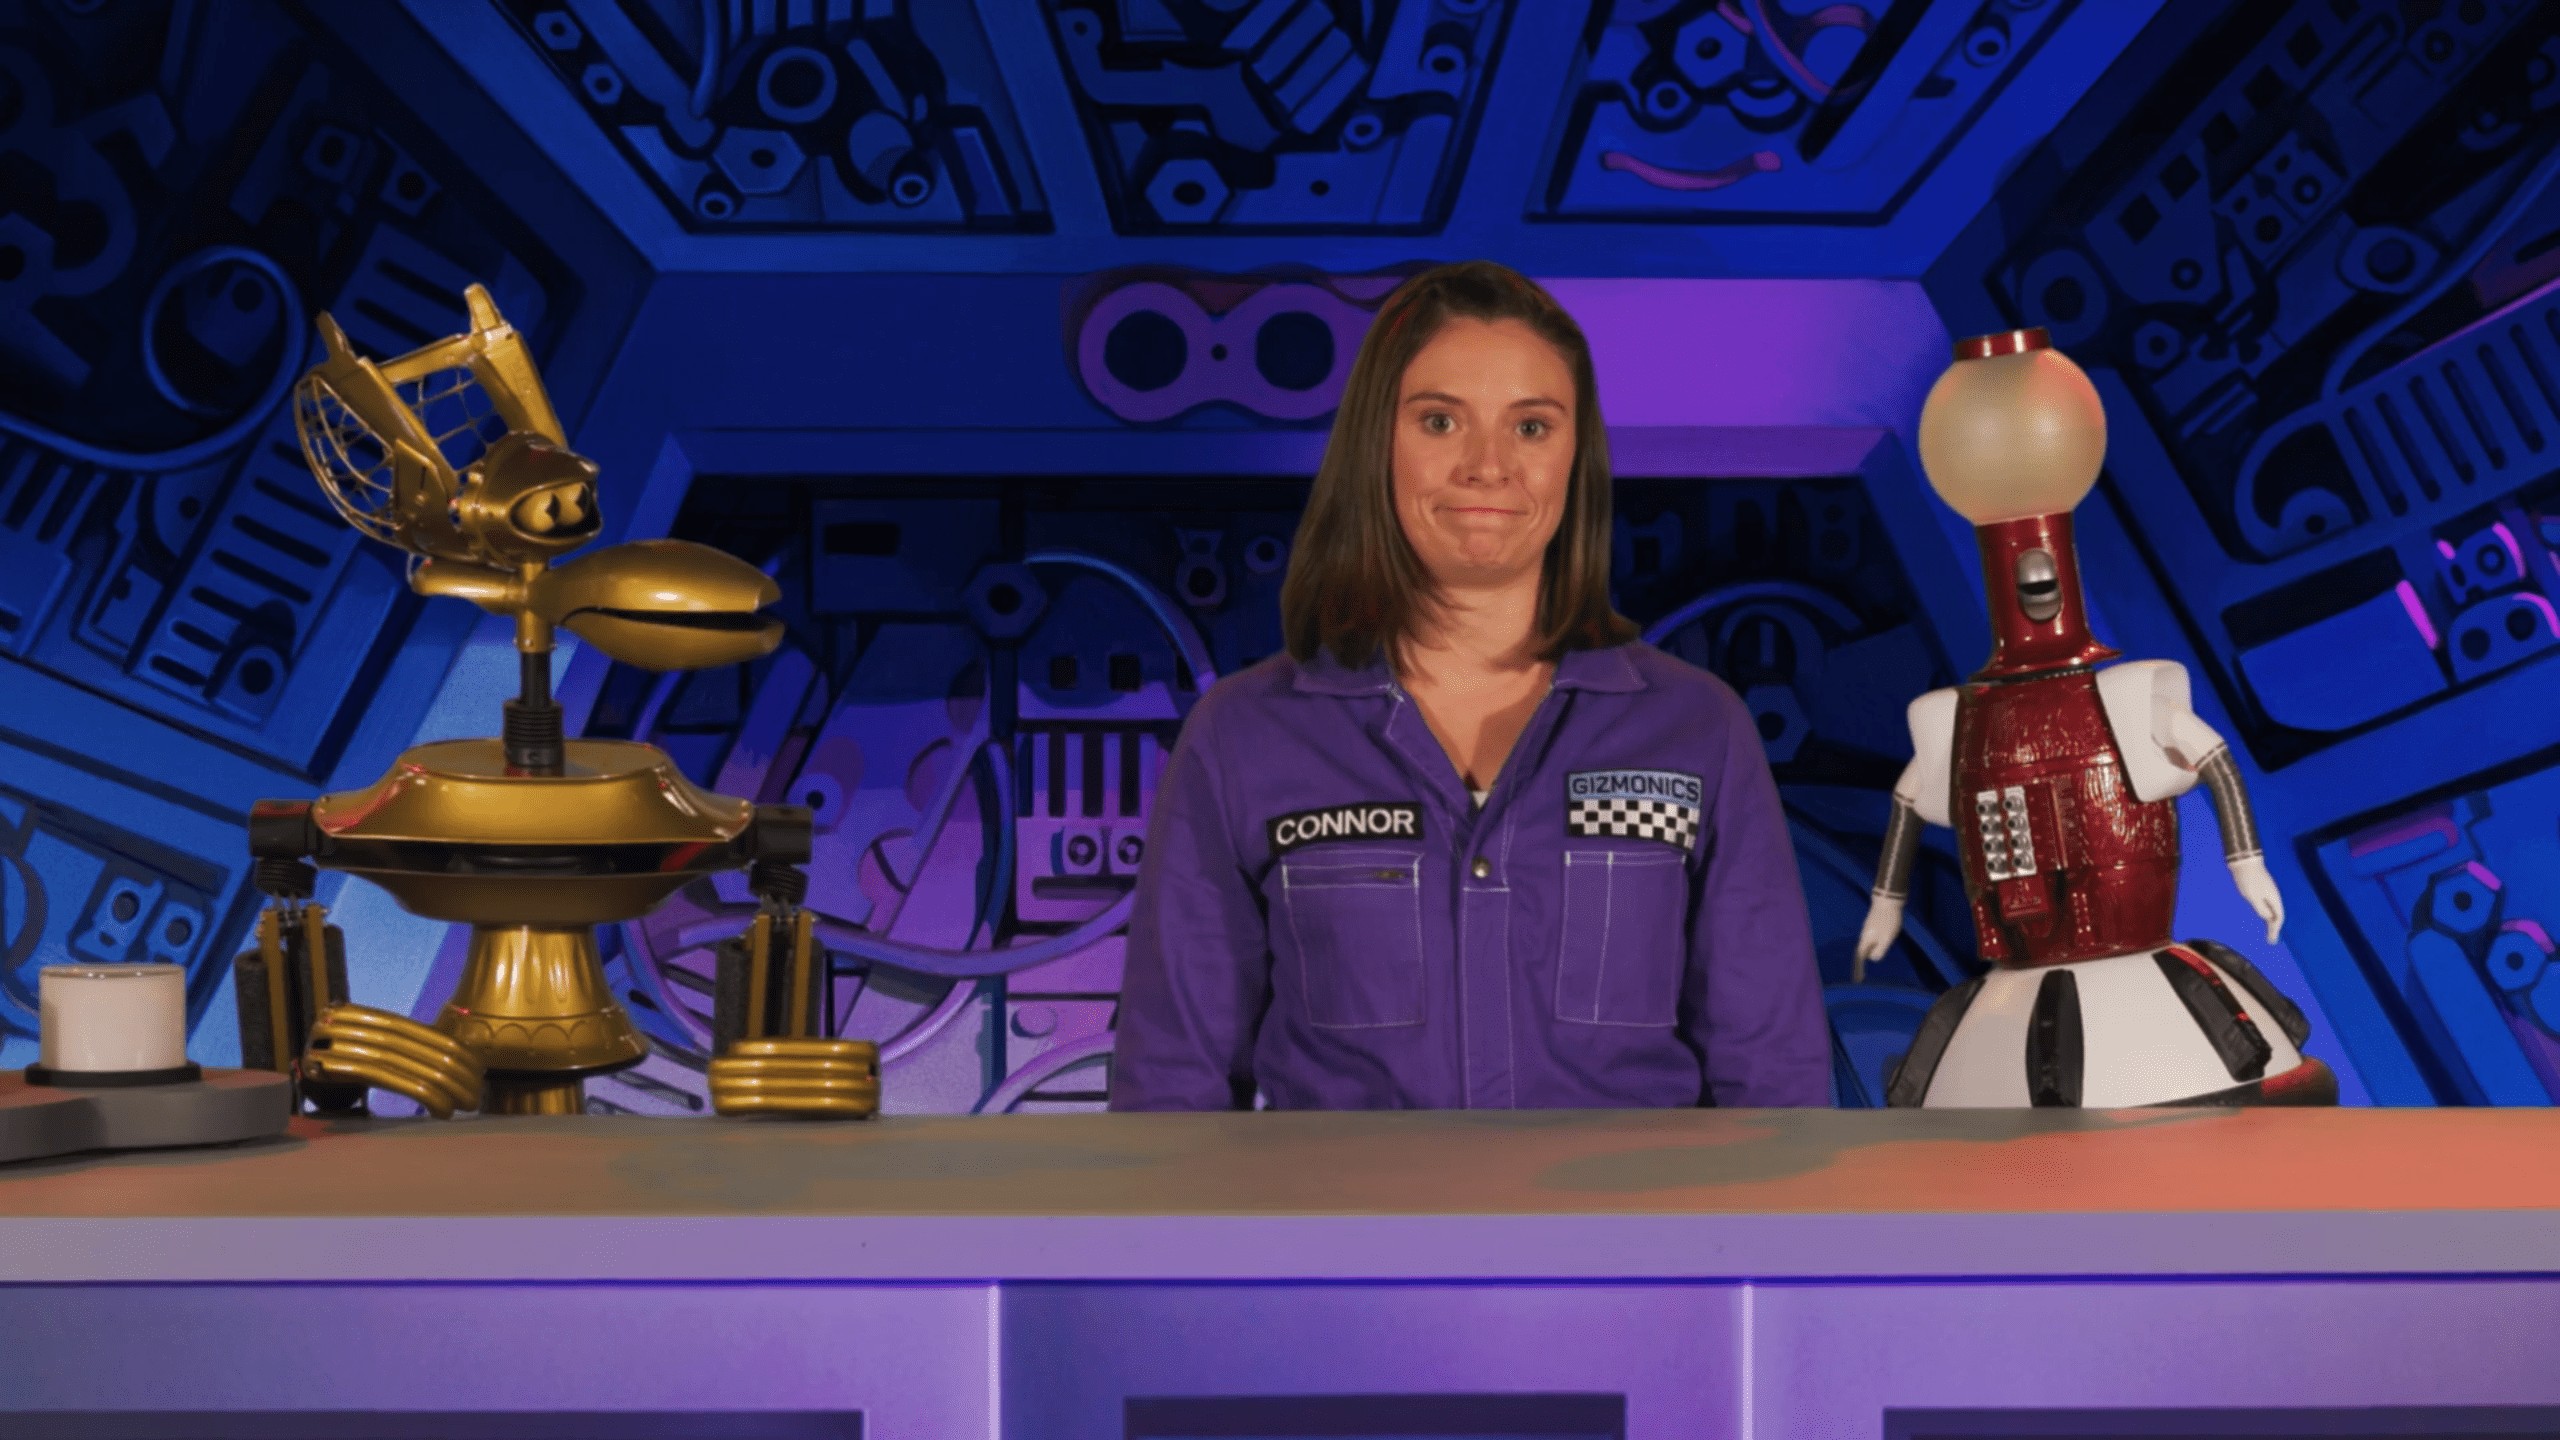 The MST3K season started on Friday! What does that mean for you? 19